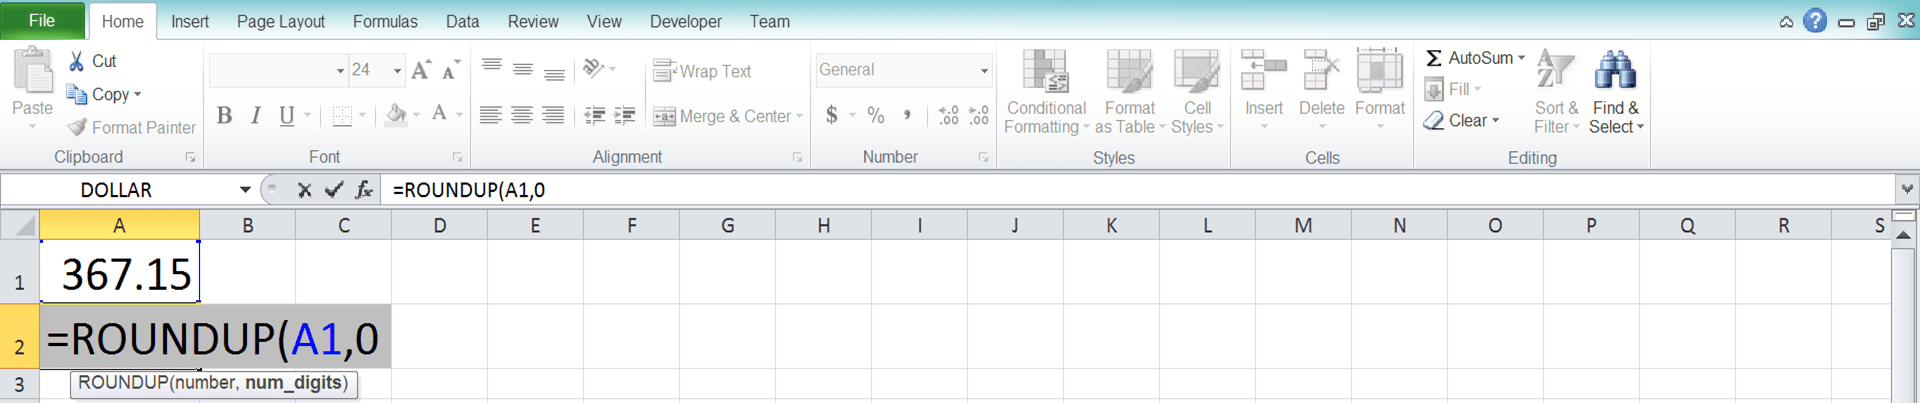 Excel ROUNDUP Formula: Functions, Examples, and How to Use - Screenshot of Step 4